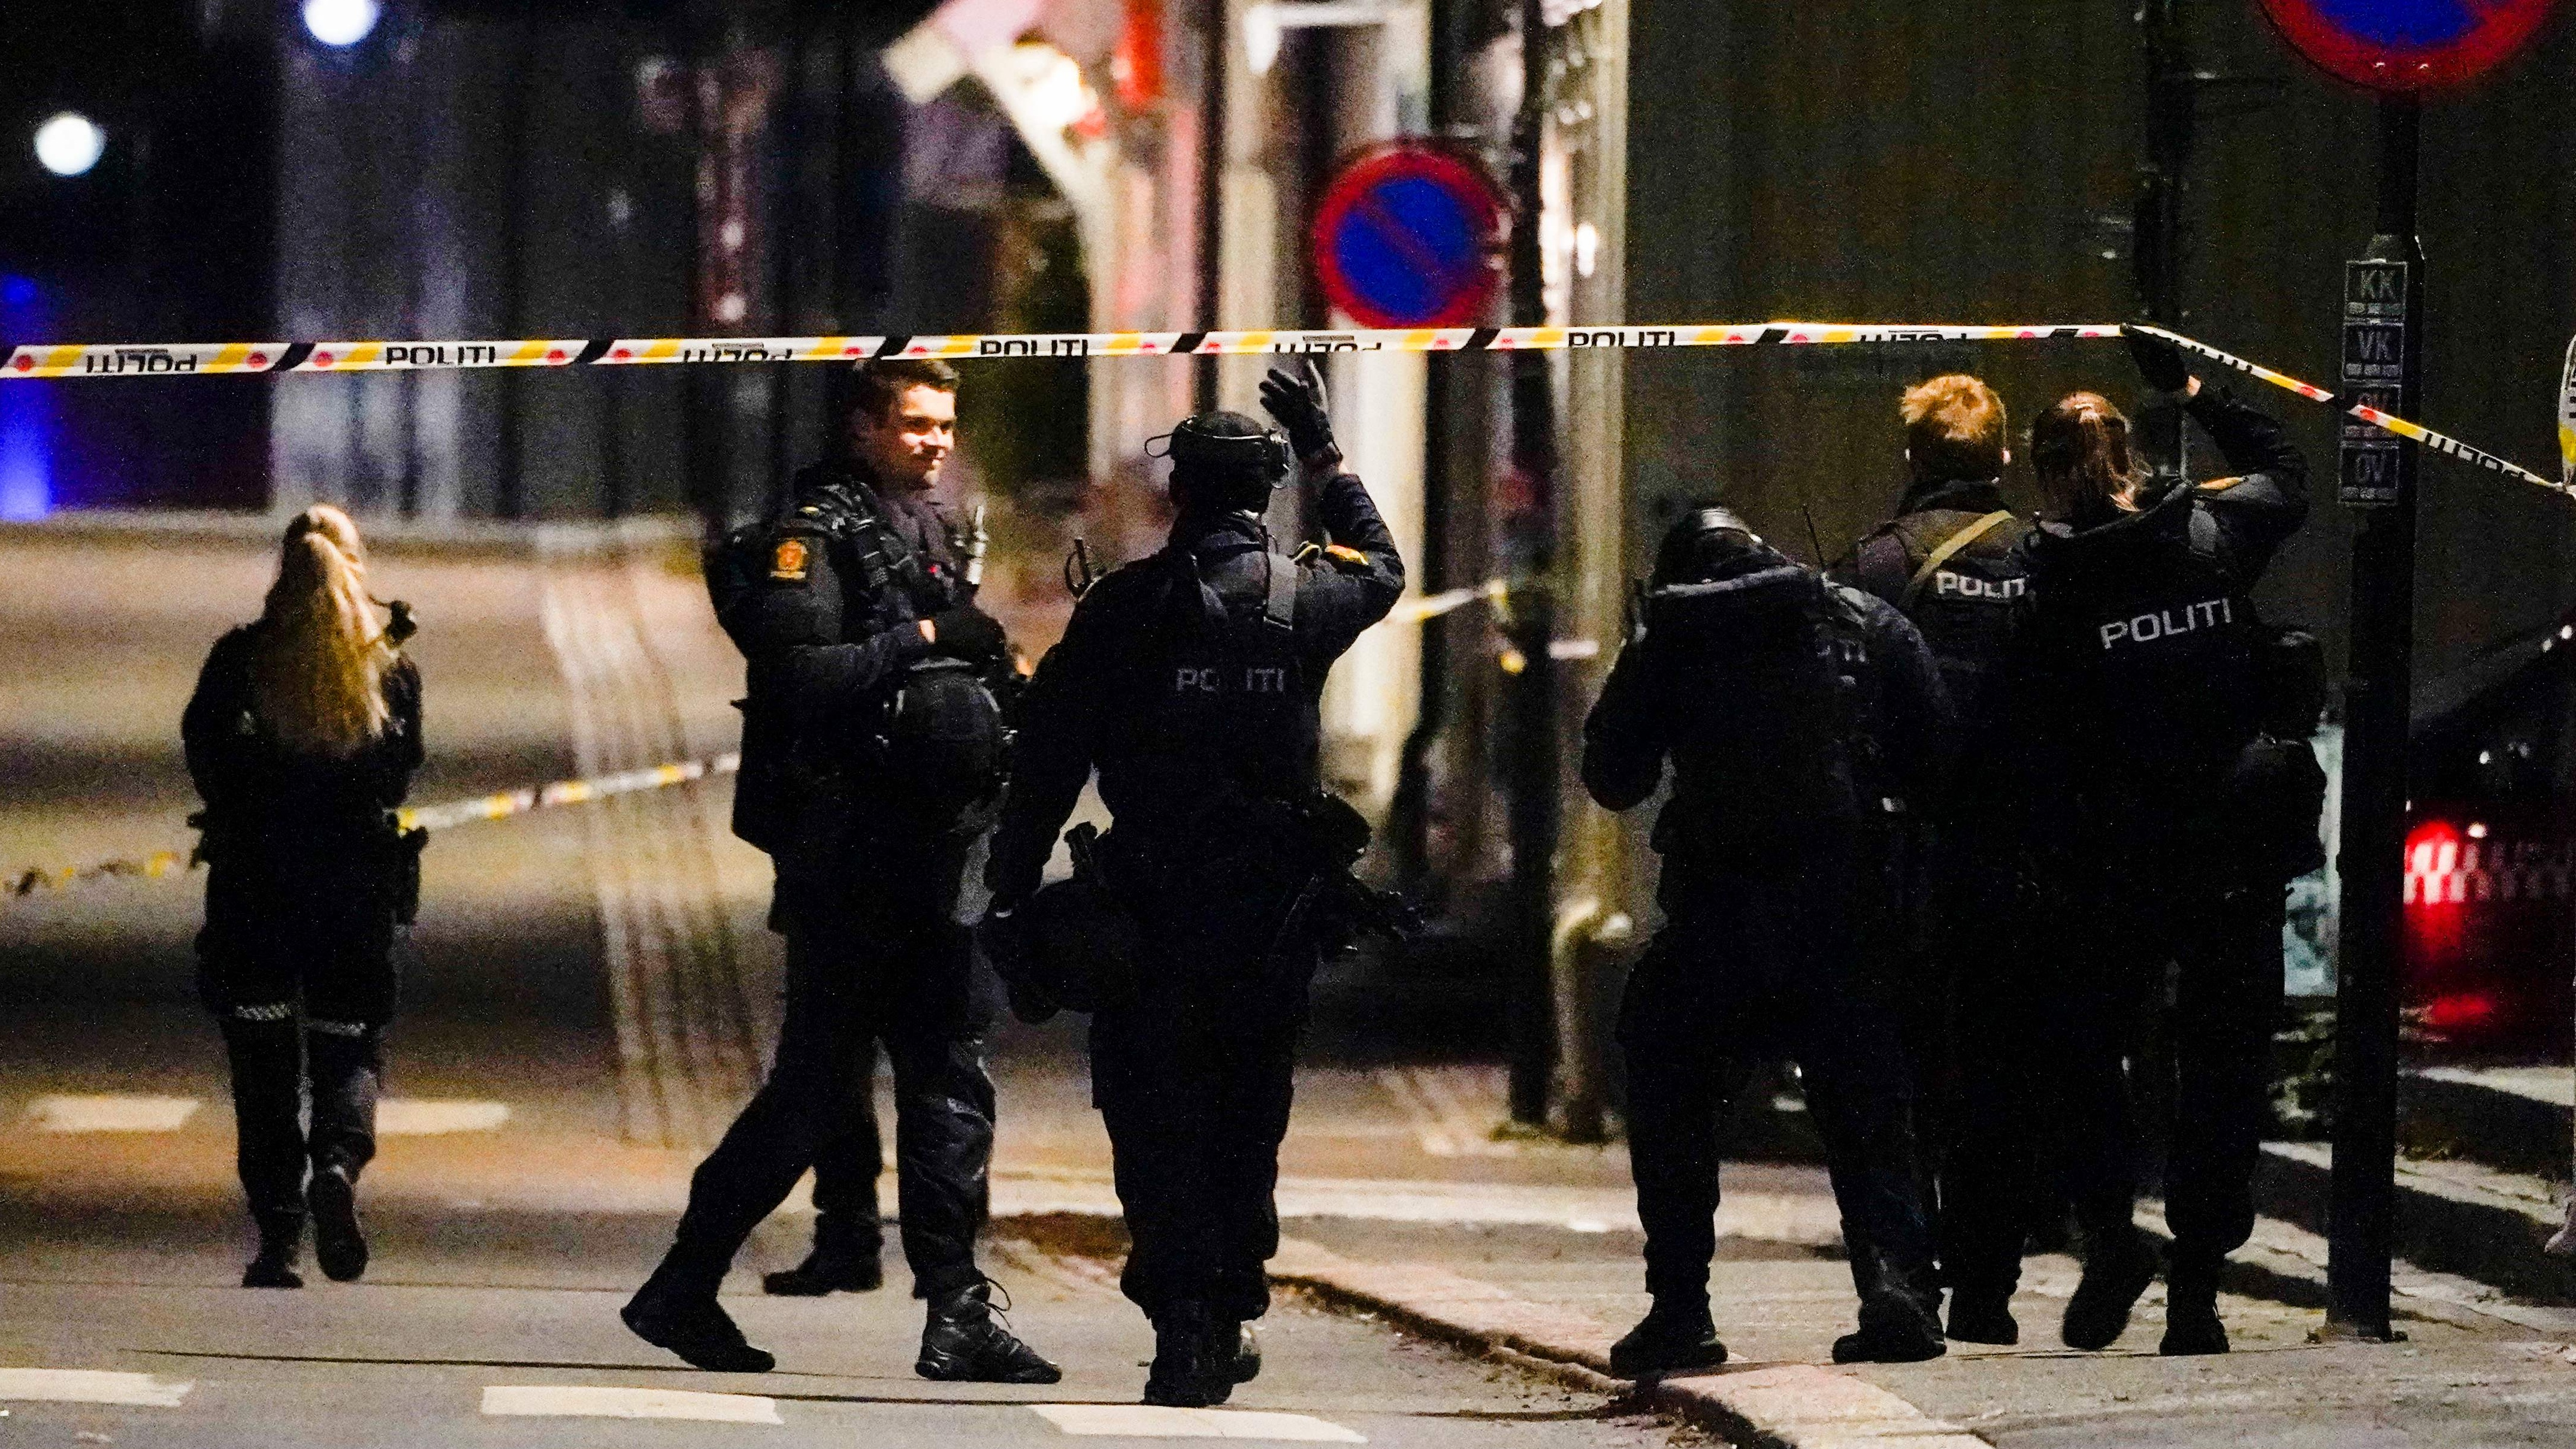 Police officers cordon off a crime scene in Kongsberg, Norway